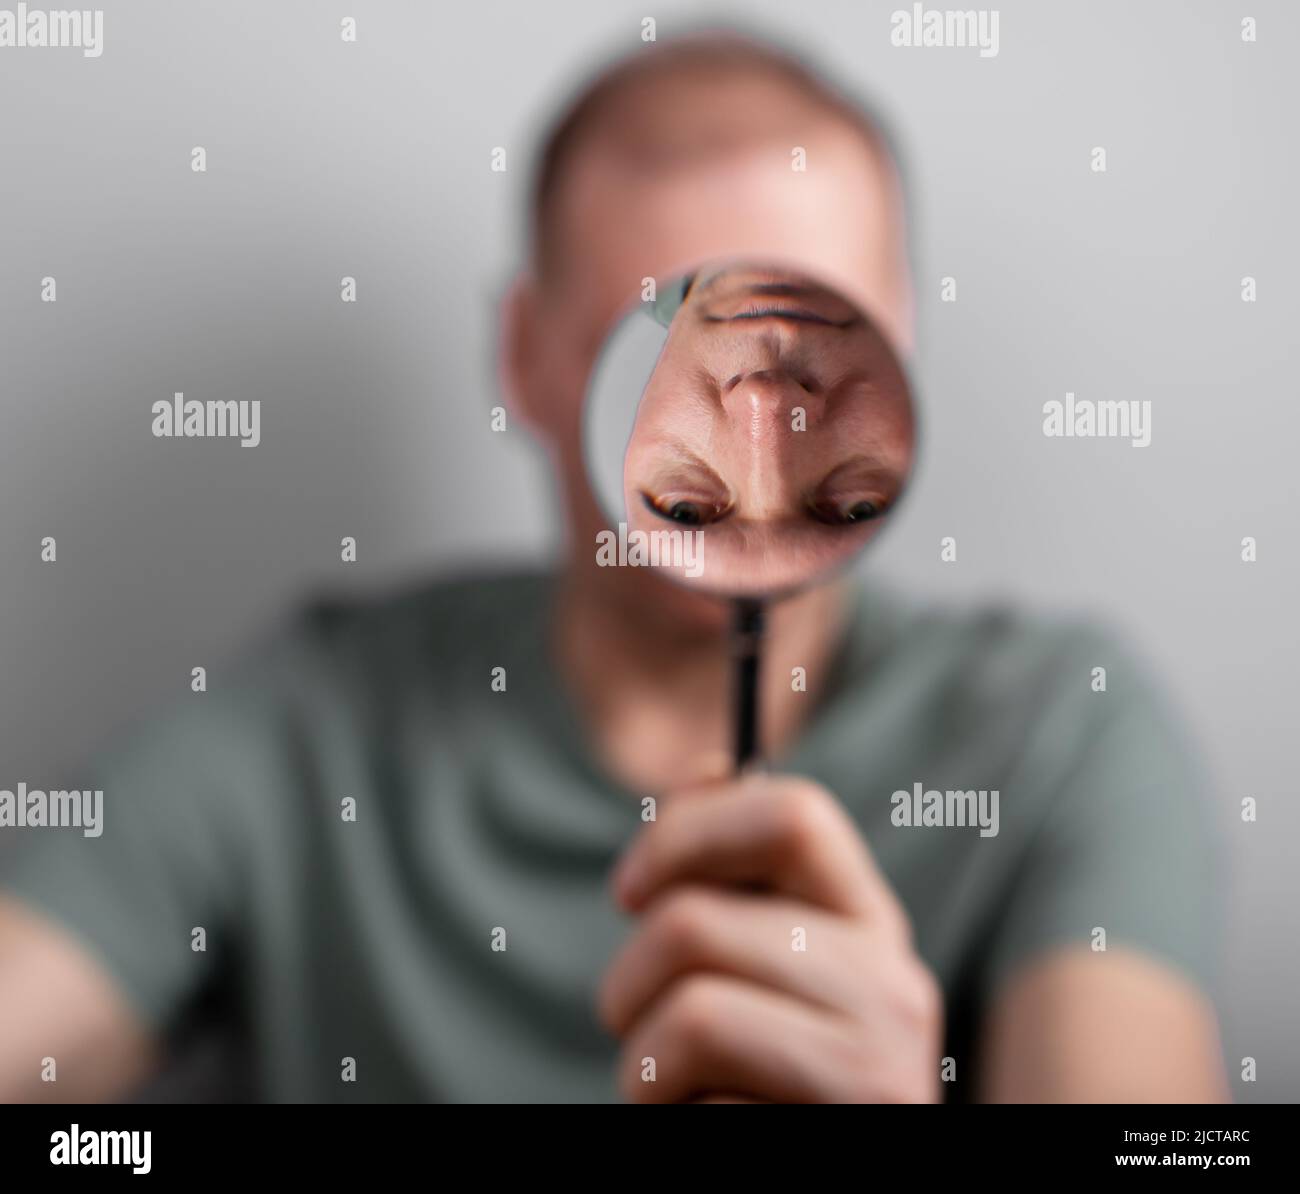 Man suffering from bipolar disorder, distorted self perception. High quality photo Stock Photo